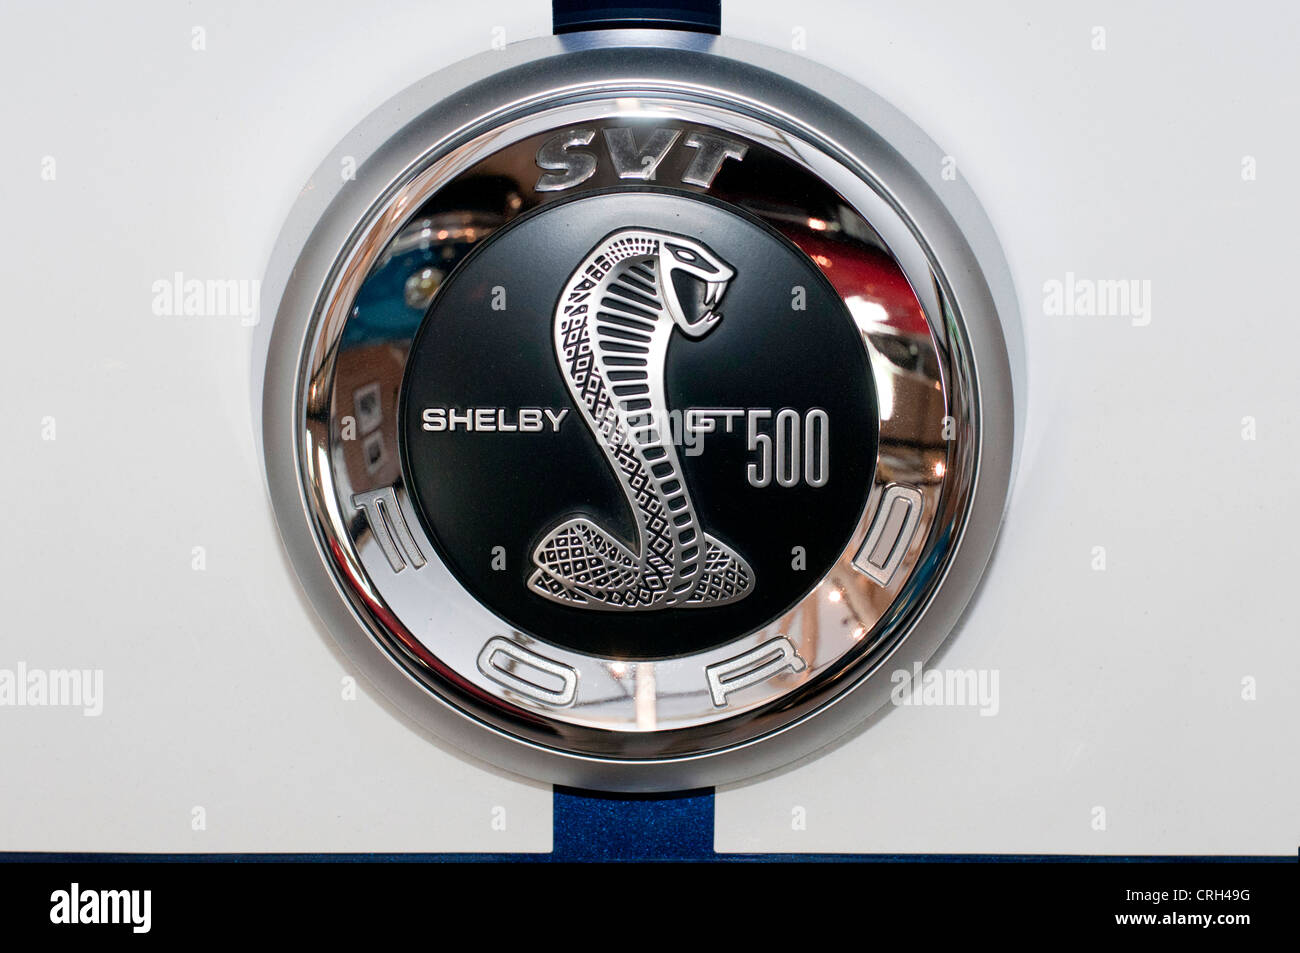 Shelby GT500 Car badge Stock Photo